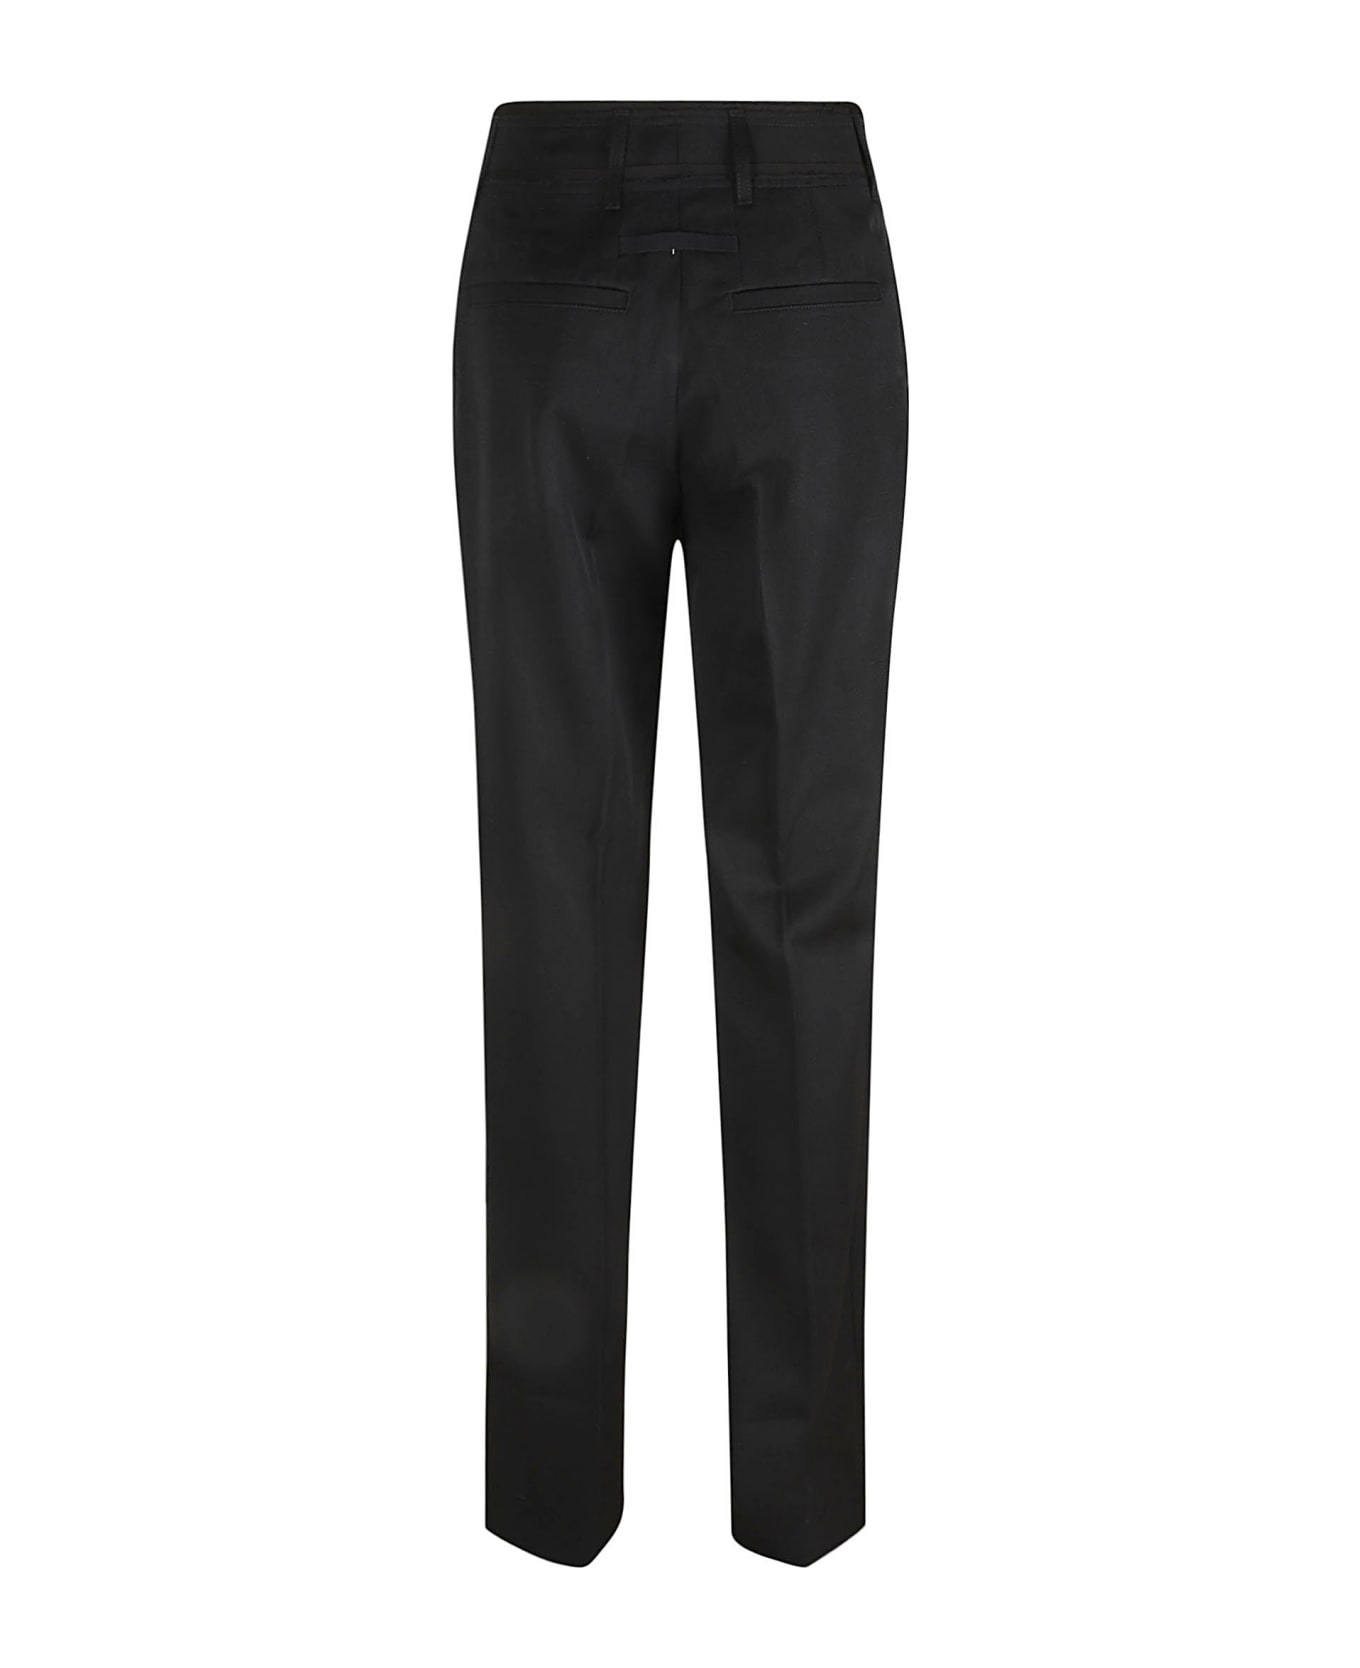 Jacquemus Ficelle Wool Trousers - Black